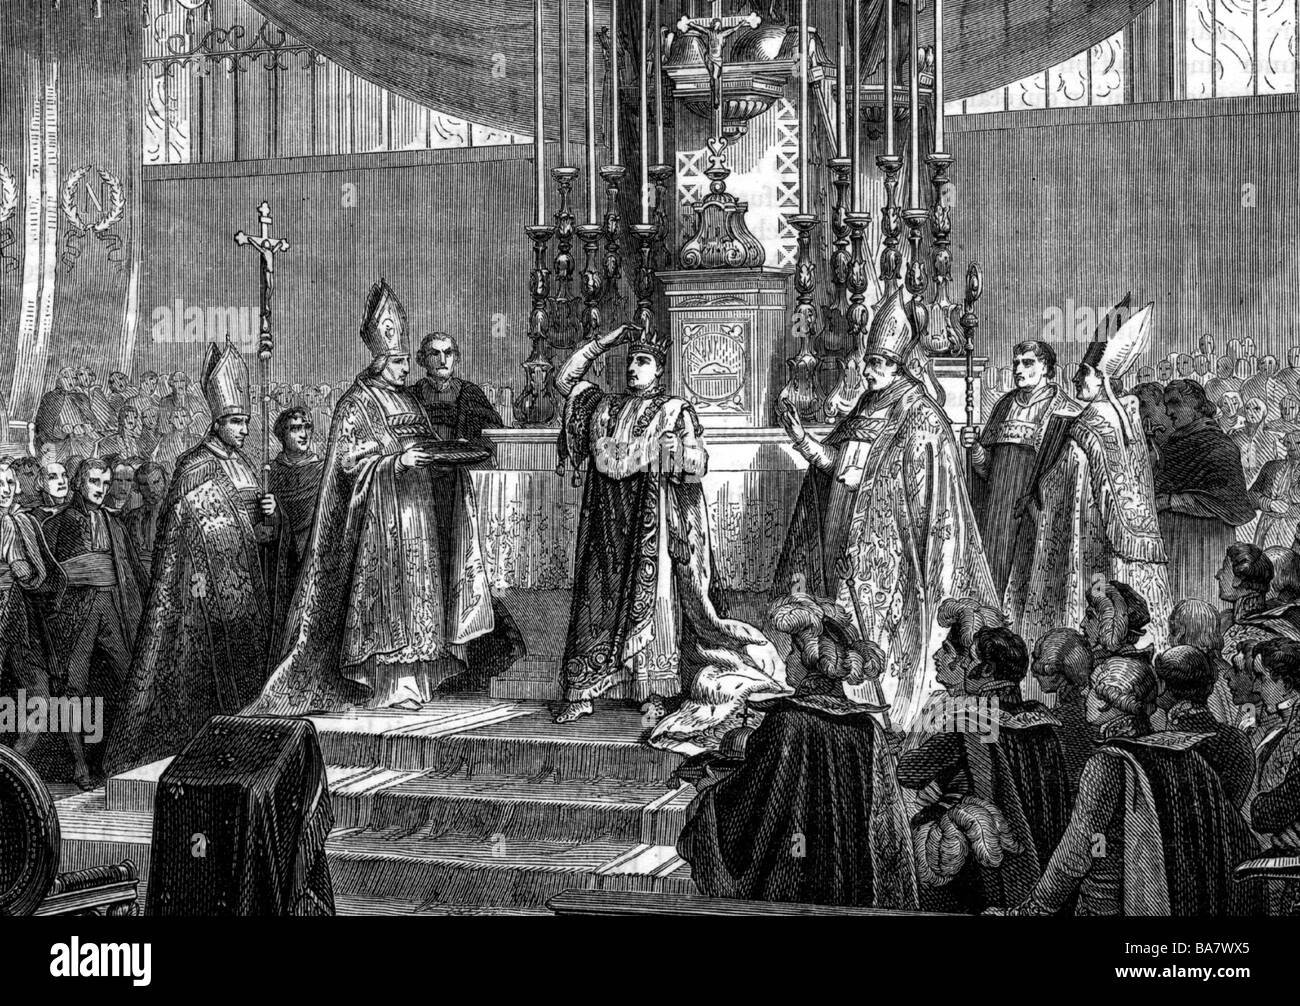 Napoleon I, 15.8.1769 - 5.5. 1821, Emperor of the French 2.12.1804 - 22.6.1815, coronation at Notre Dame, Paris, 2.10.1804, wood engraving, 19th century, Stock Photo